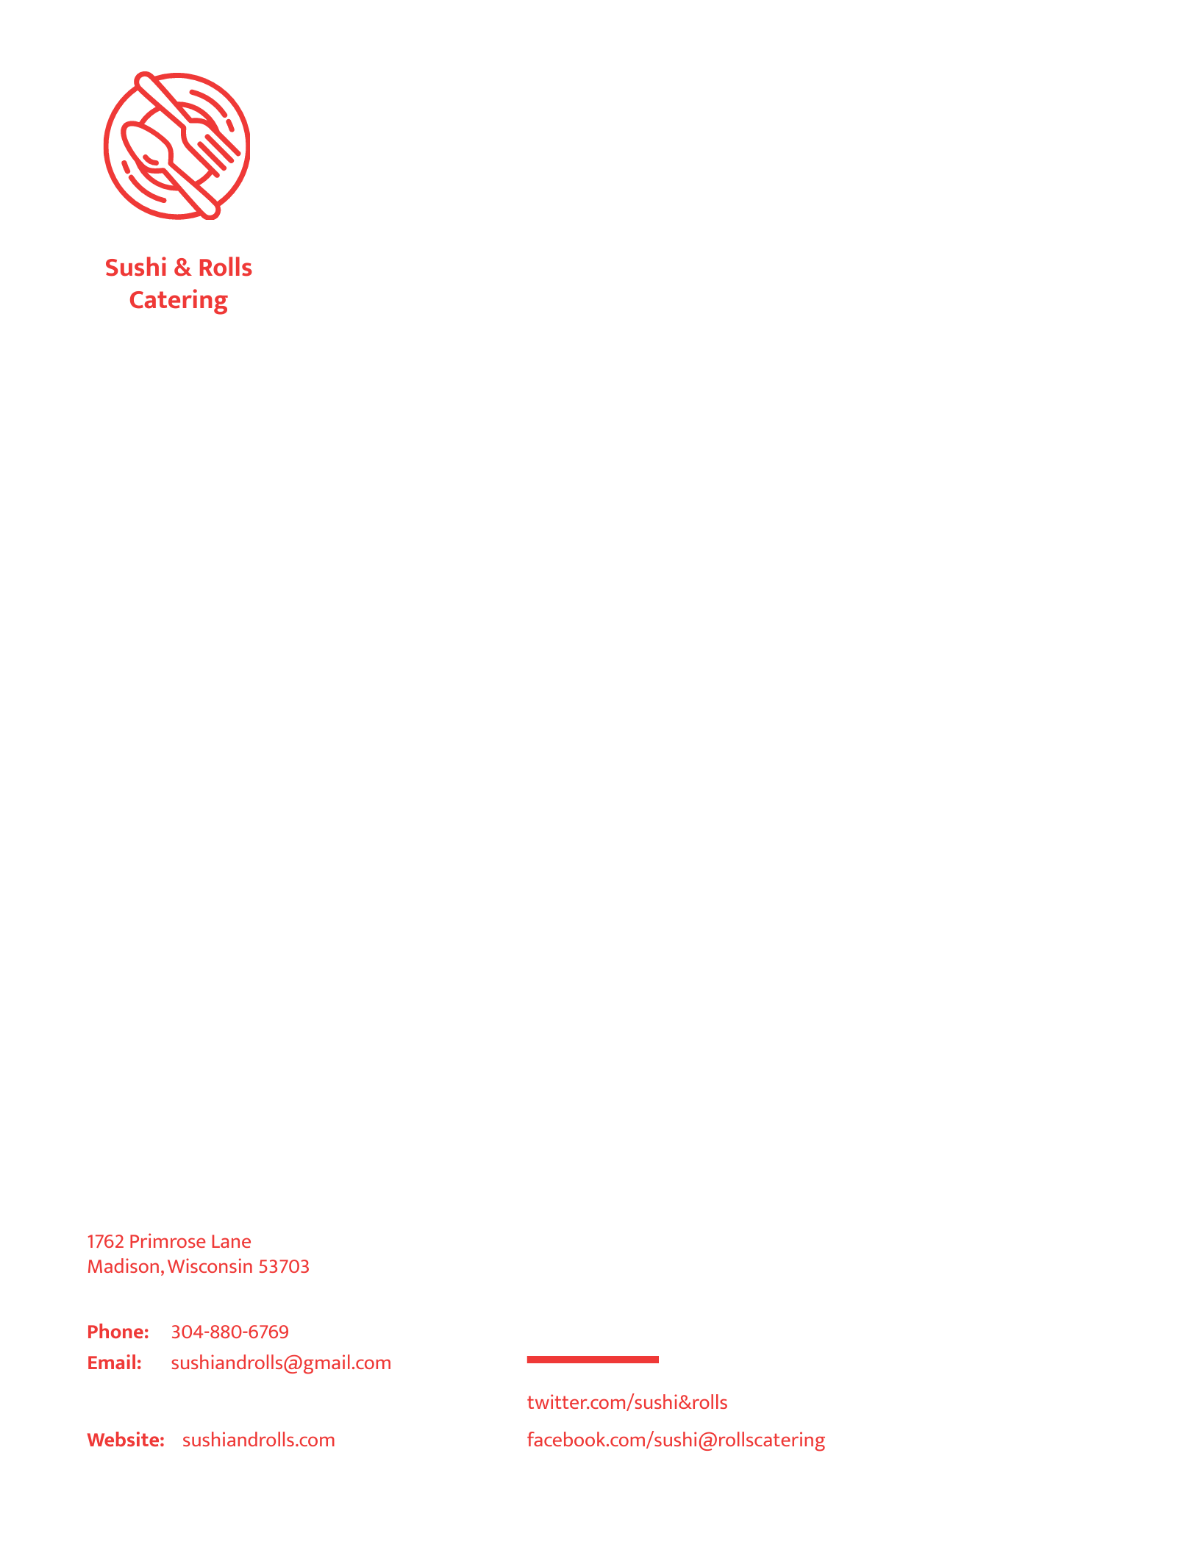 Catering Services Letterhead Template